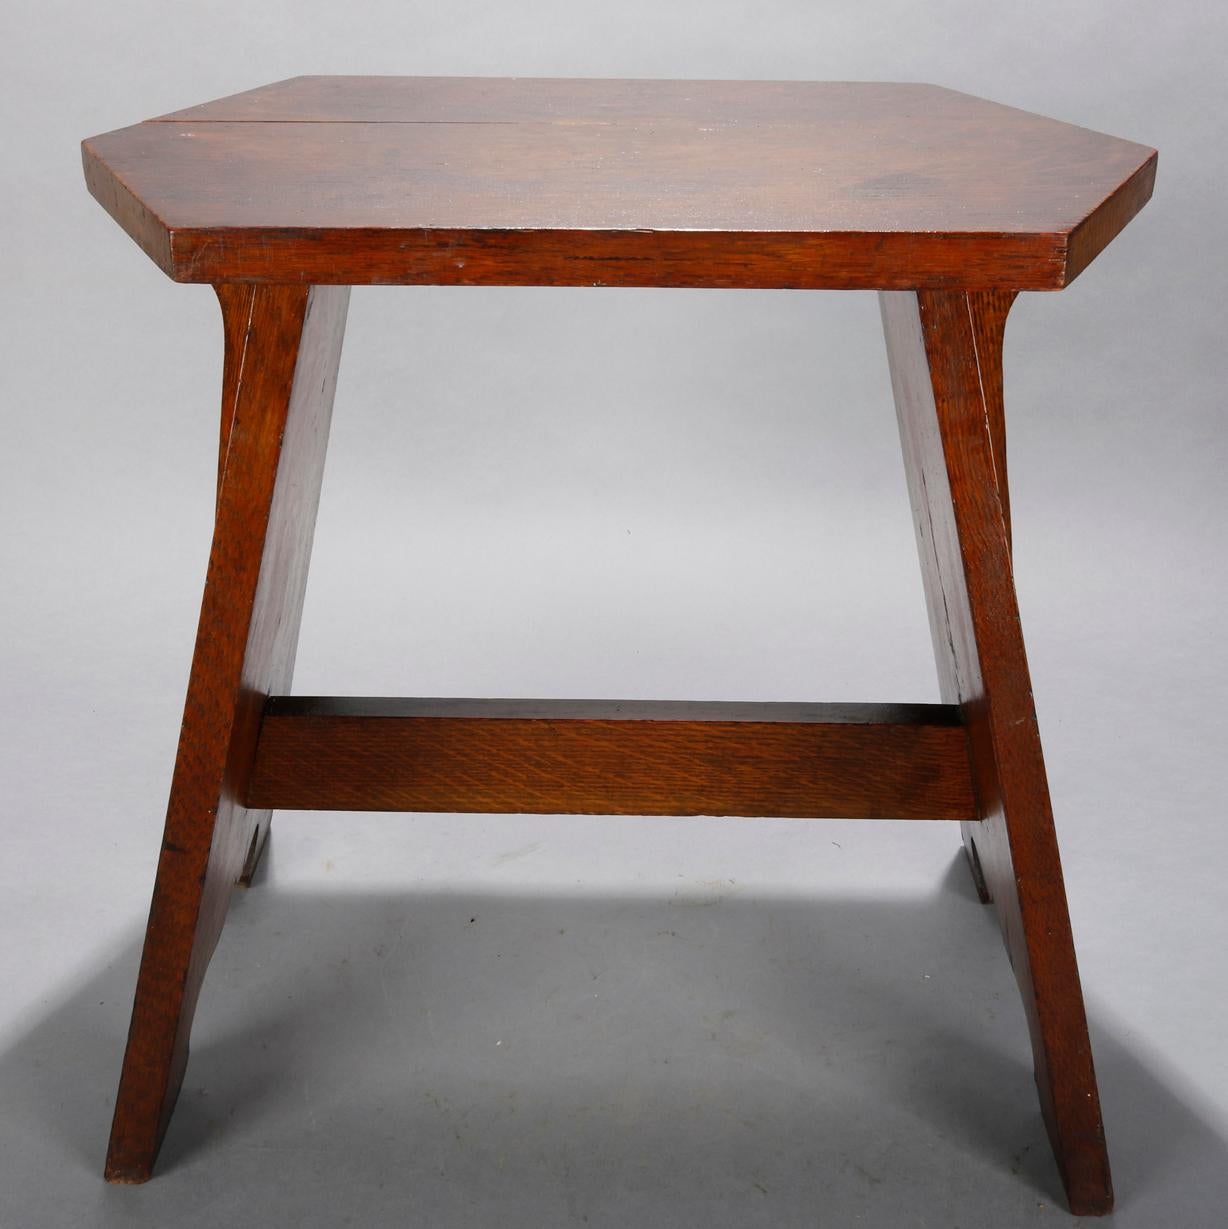 An antiques Arts & Crafts Mission cricket bench in the manner of Limbert offers oak construction with elongated stylized diamond seat surmounting flared legs, circa 1910.

Measures: 18.25